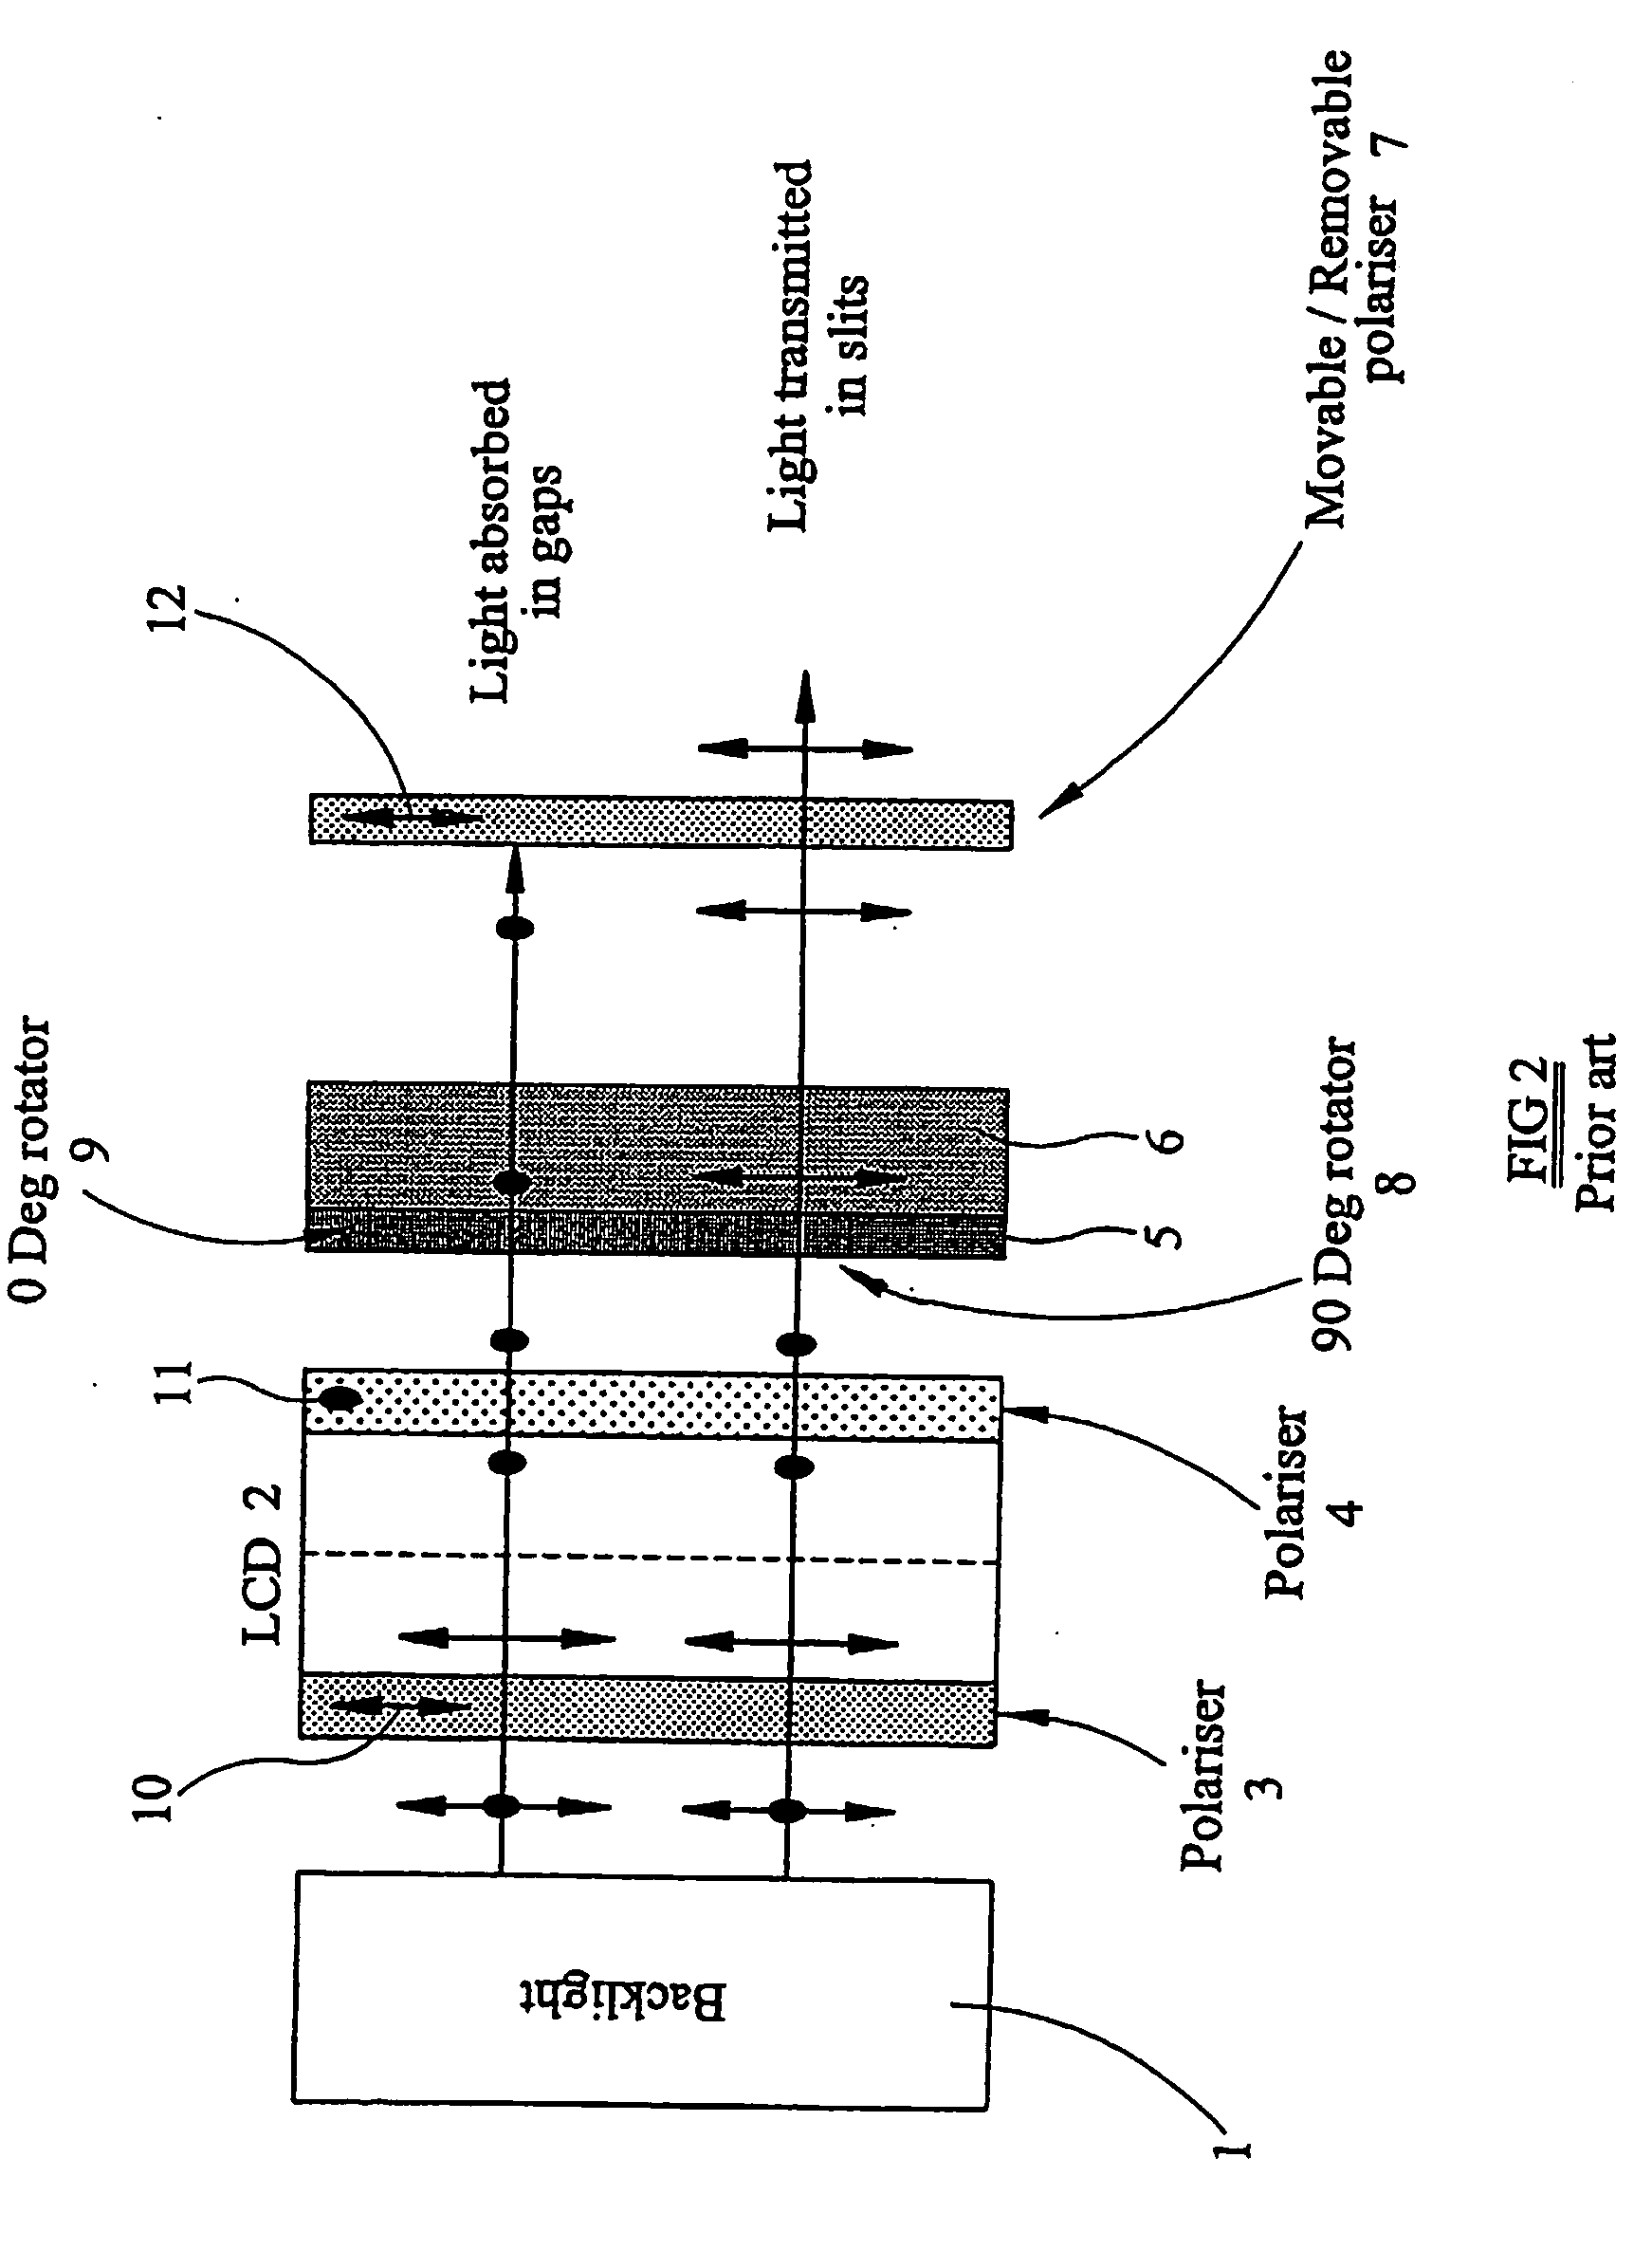 Optical device and display operating in two dimensional and autostereoscopic three dimensional modes